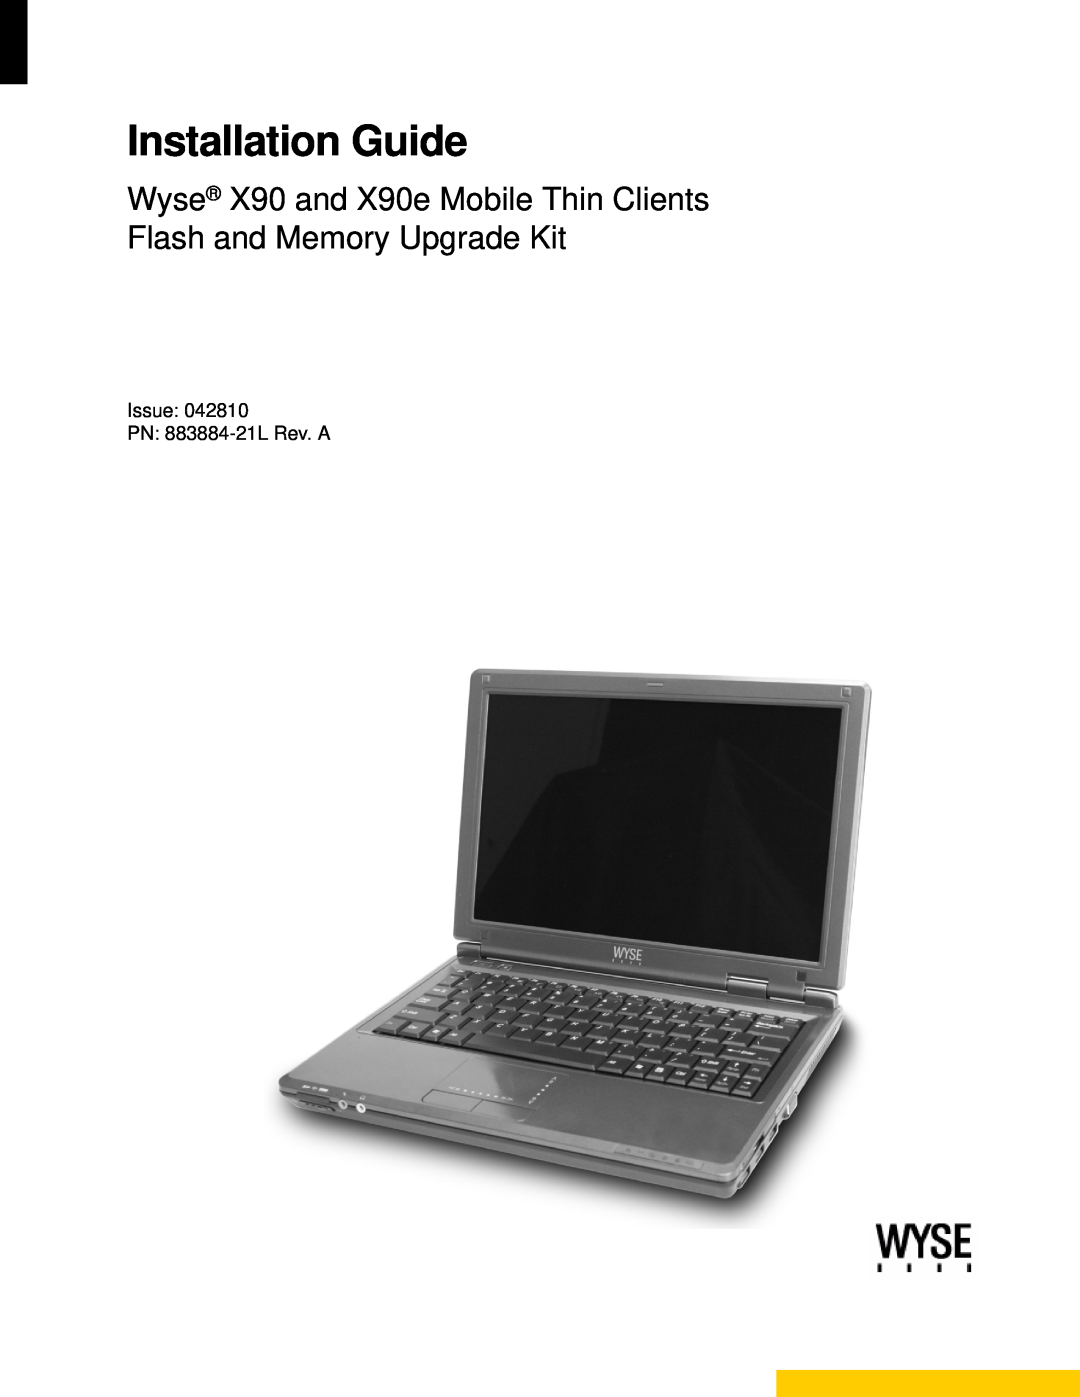 Wyse Technology manual Installation Guide, Wyse X90 and X90e Mobile Thin Clients Flash and Memory Upgrade Kit 